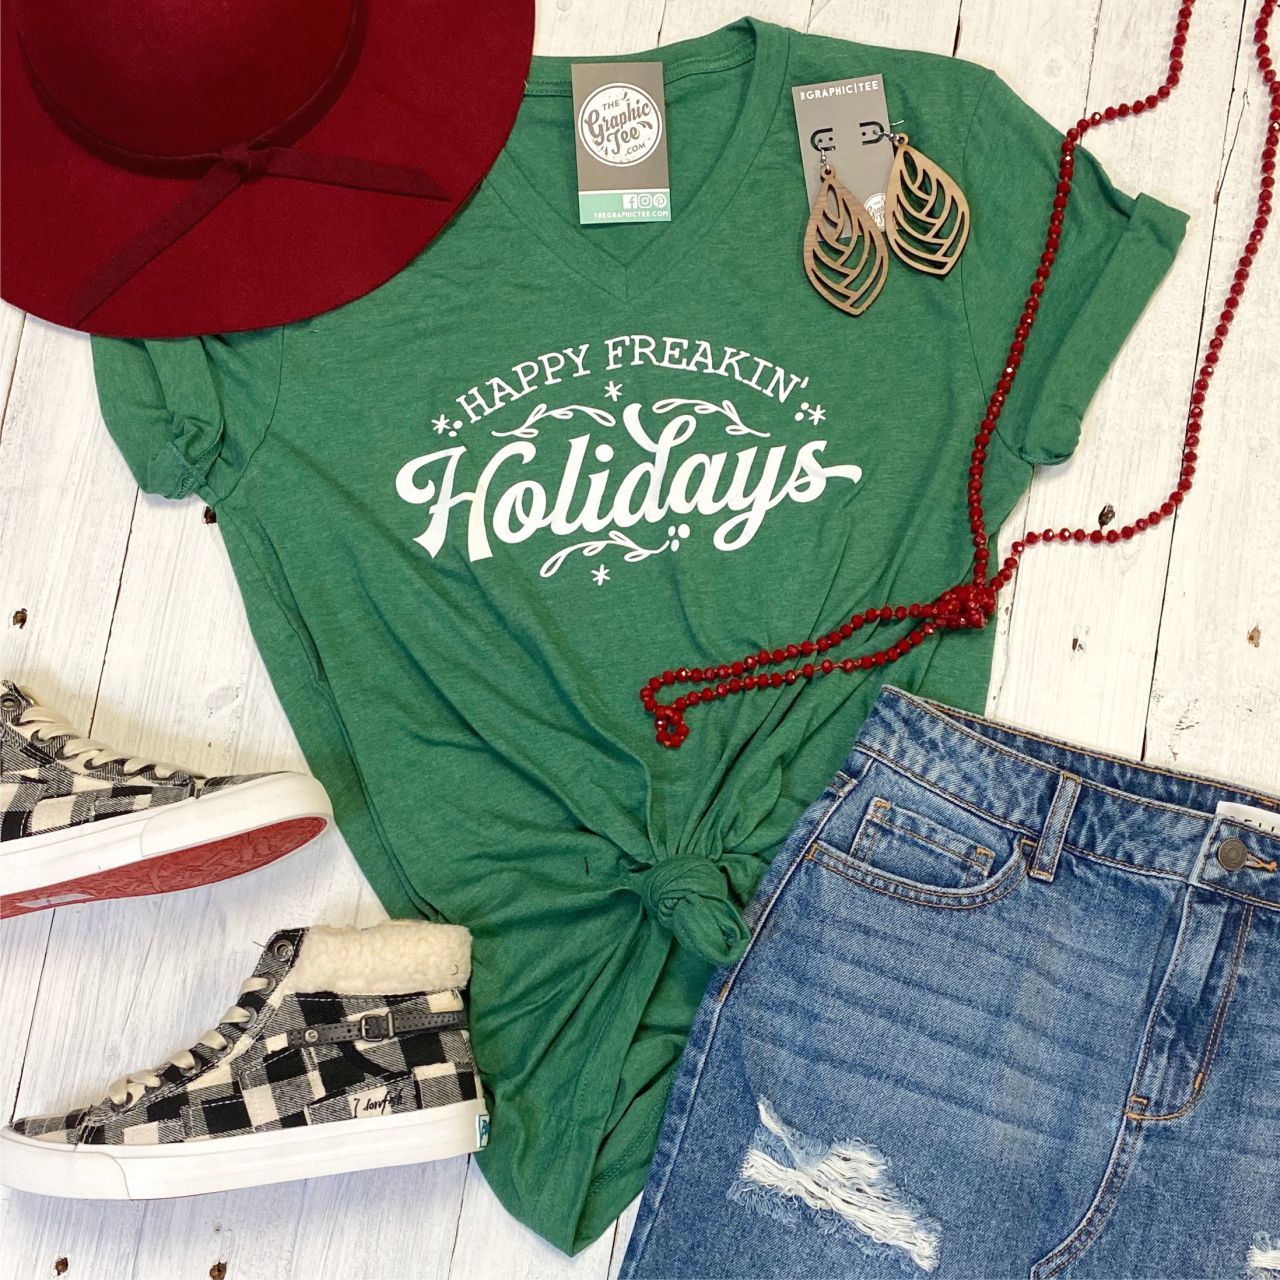 Happy Freakin' Holidays - V-Neck Tee - The Graphic Tee